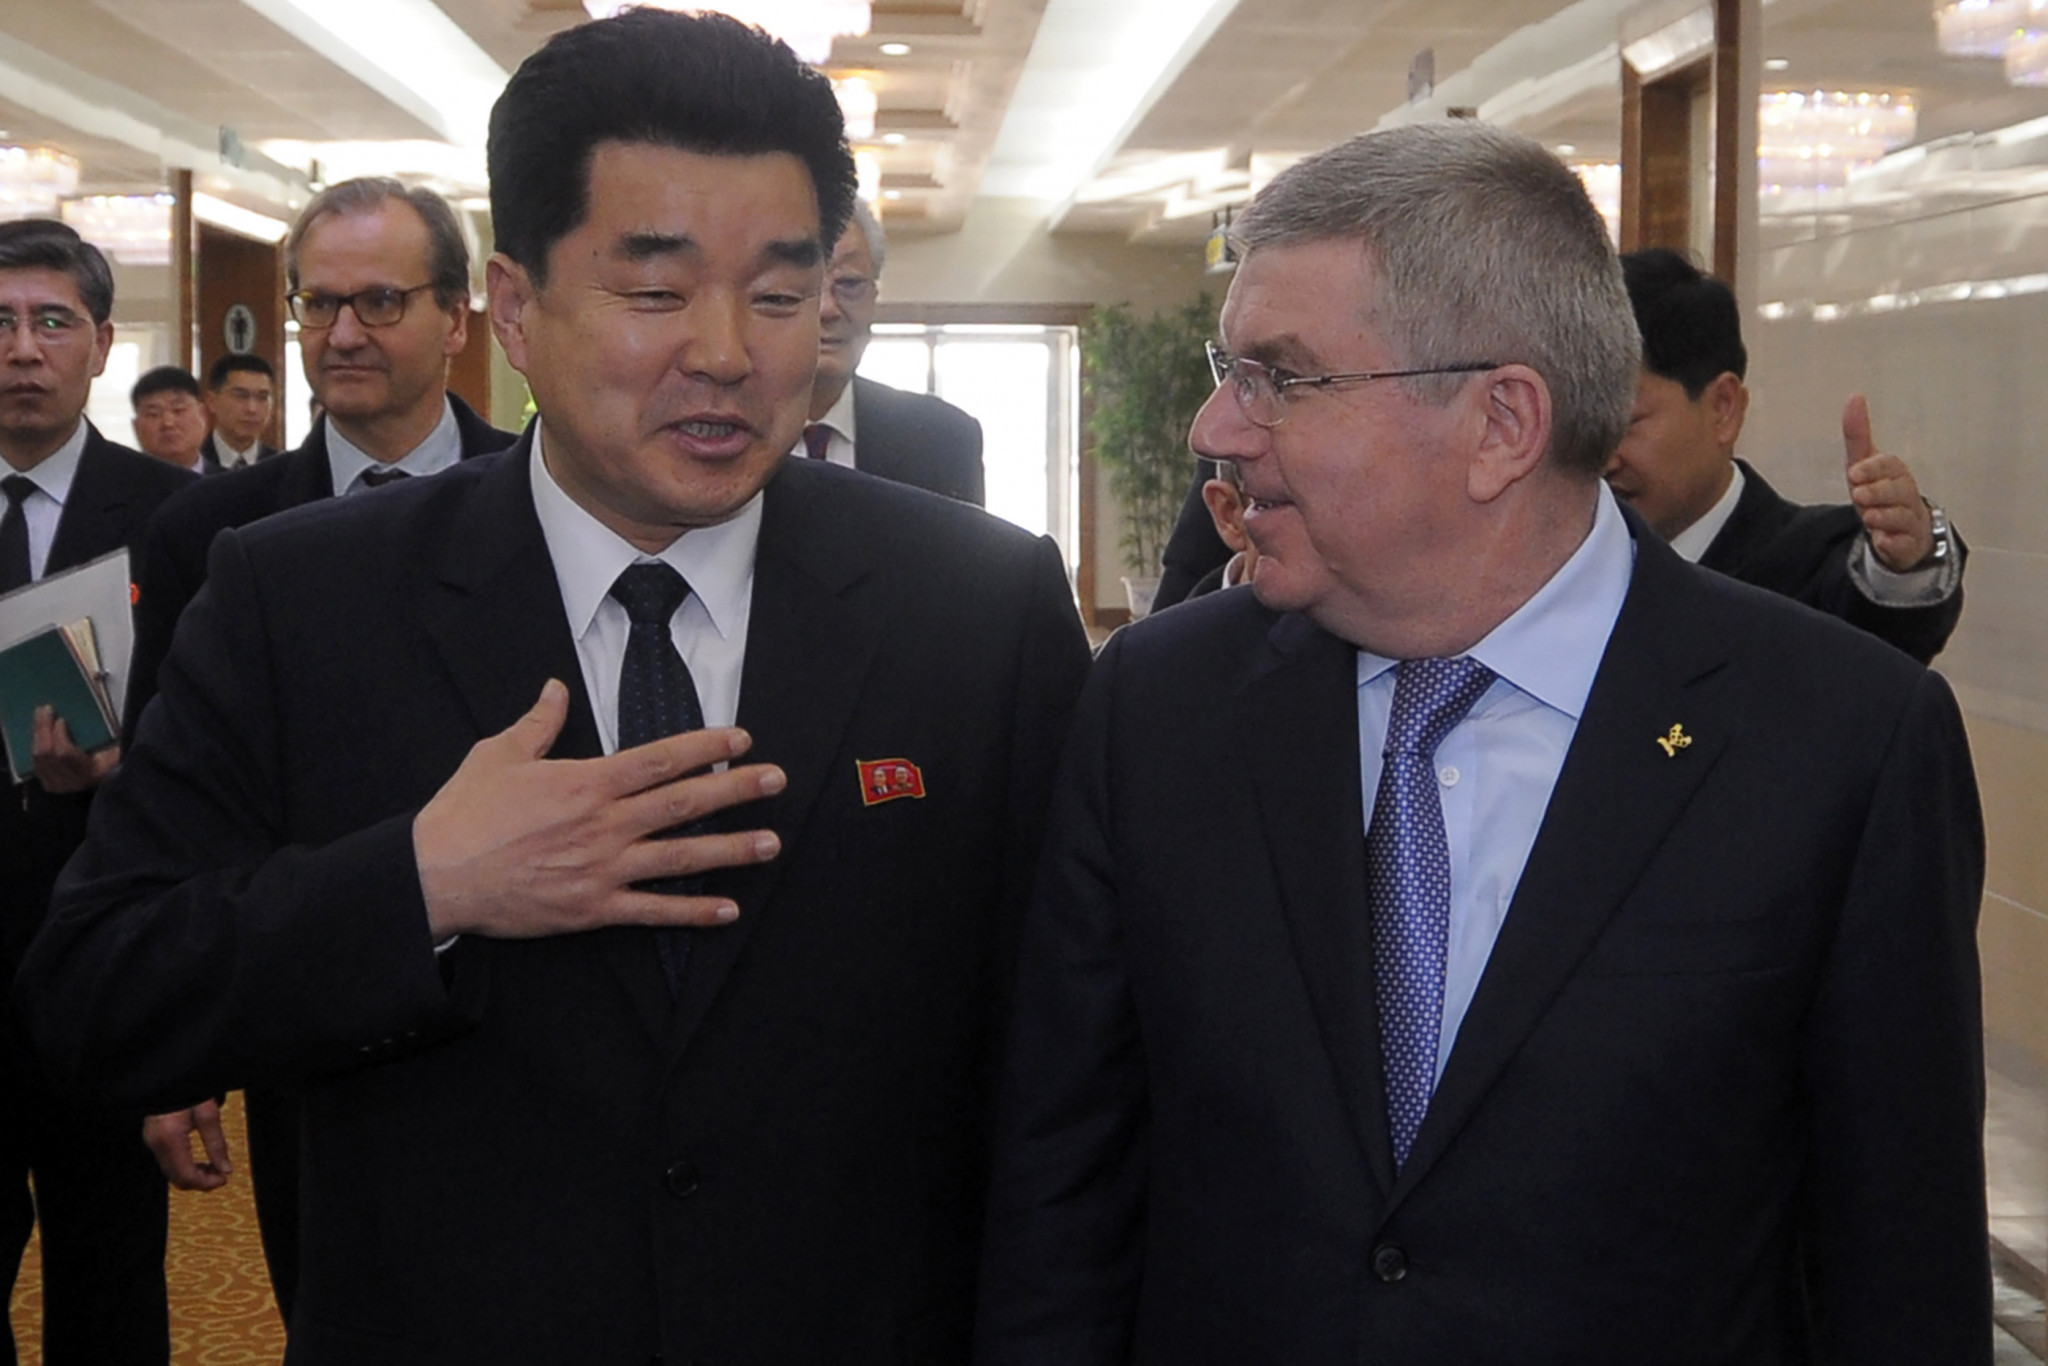 Thomas Bach speaks with Kim Il Guk, North Korea's Minister of Physical Culture and Sports, in Pyongyang today ©Getty Images